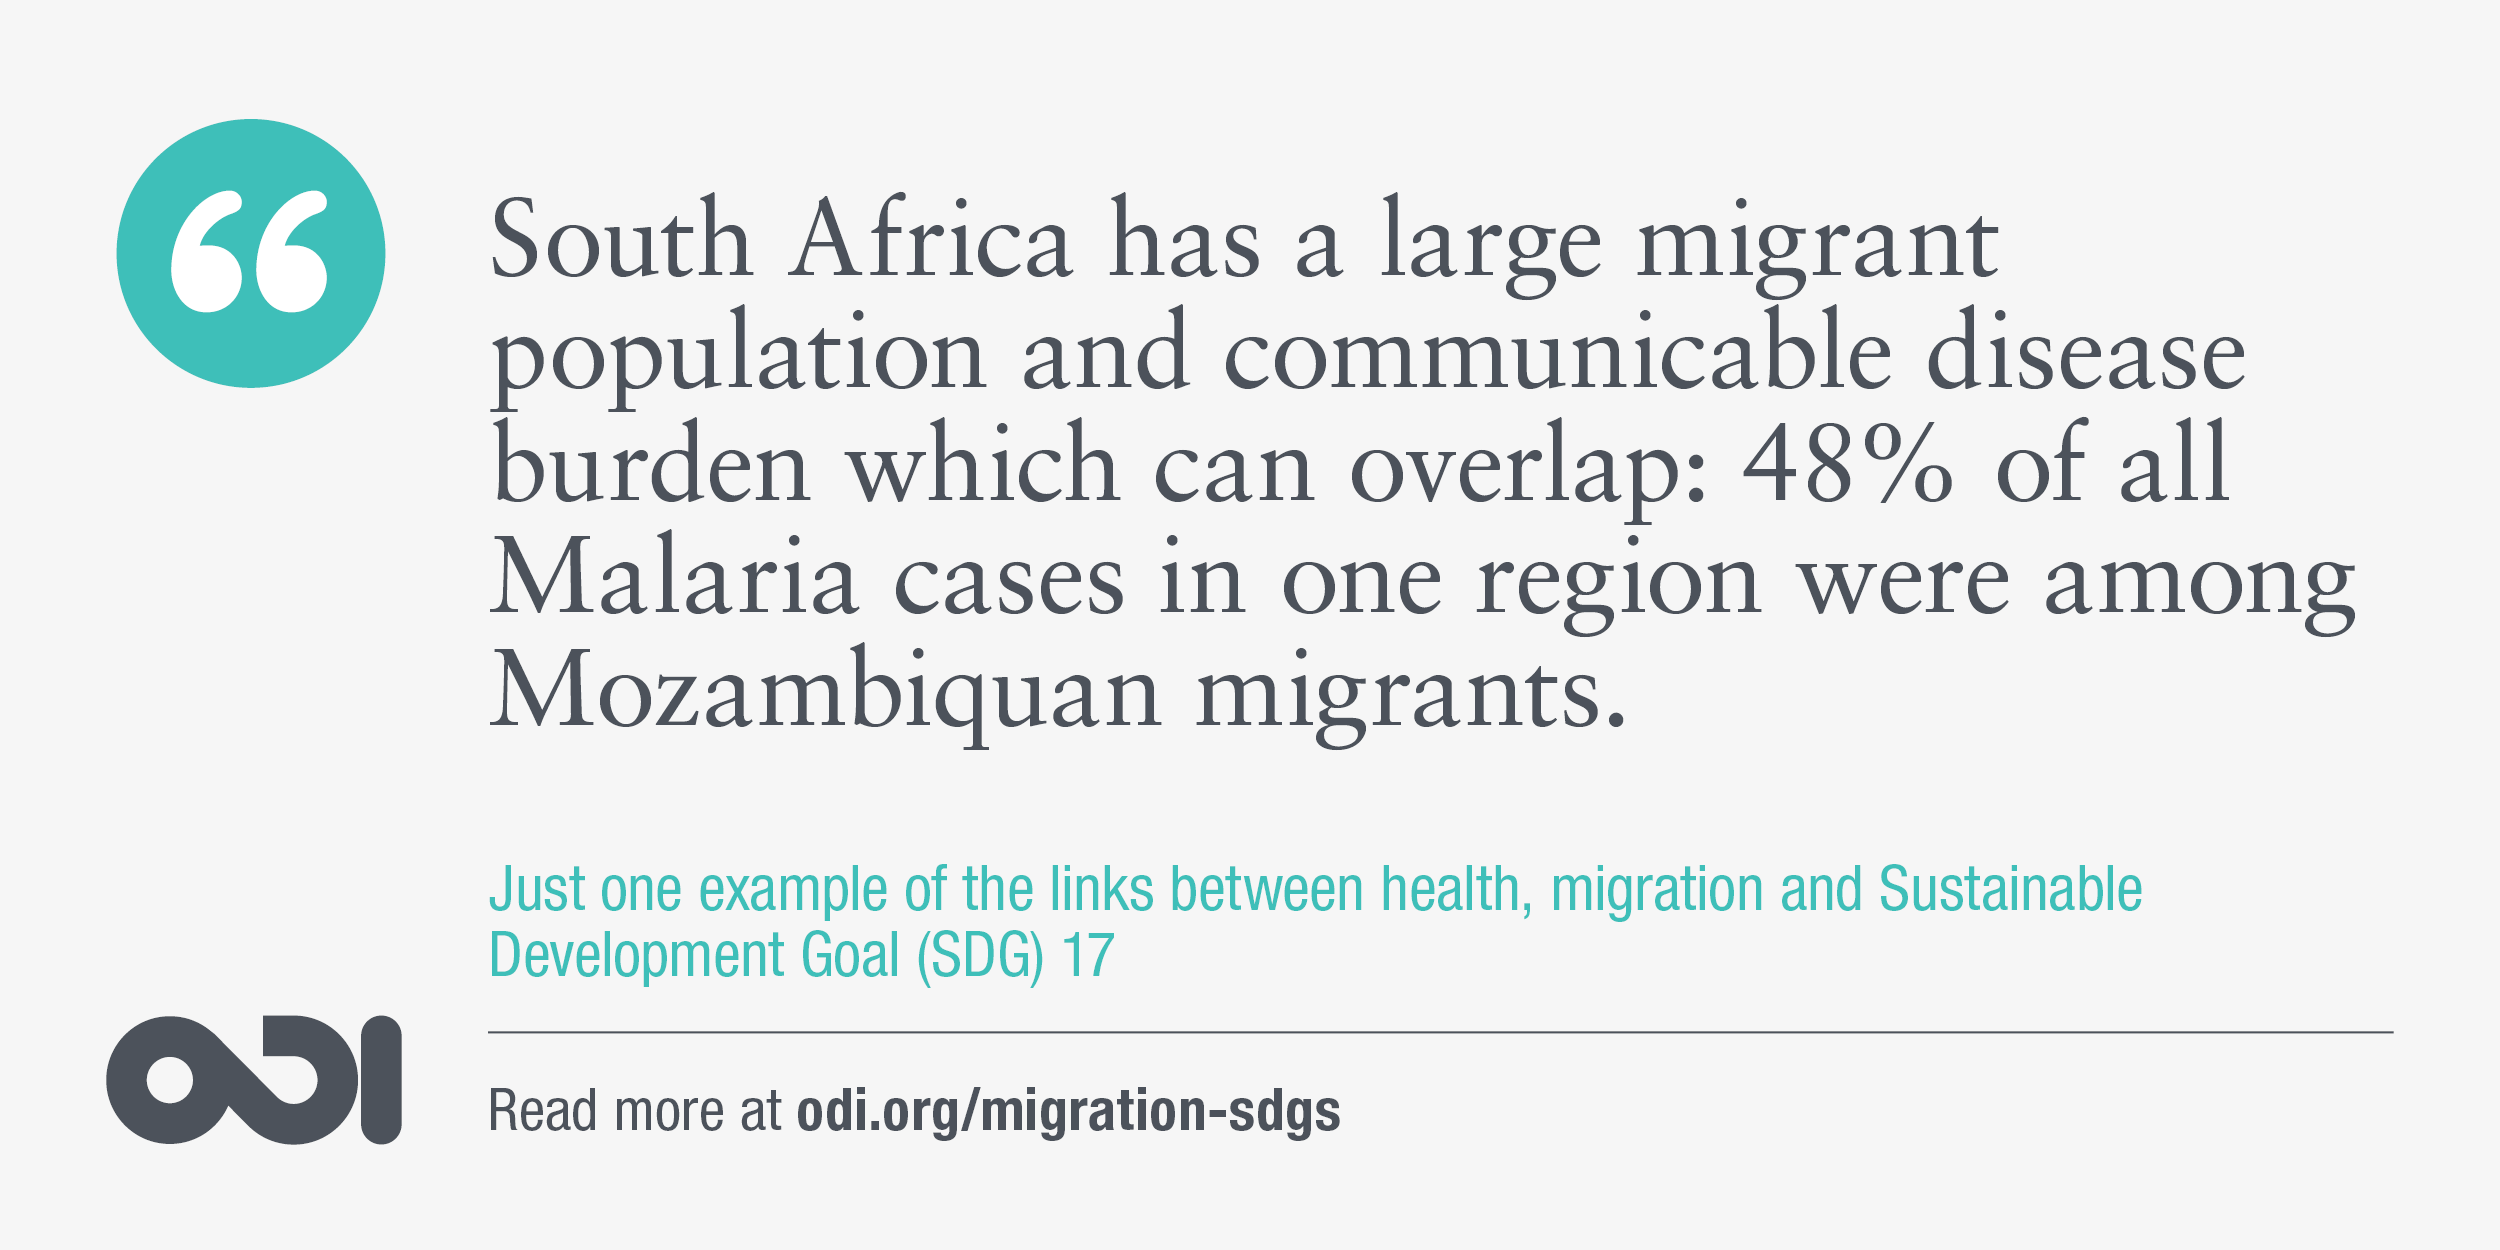 The links between health, migration and SDG 17.